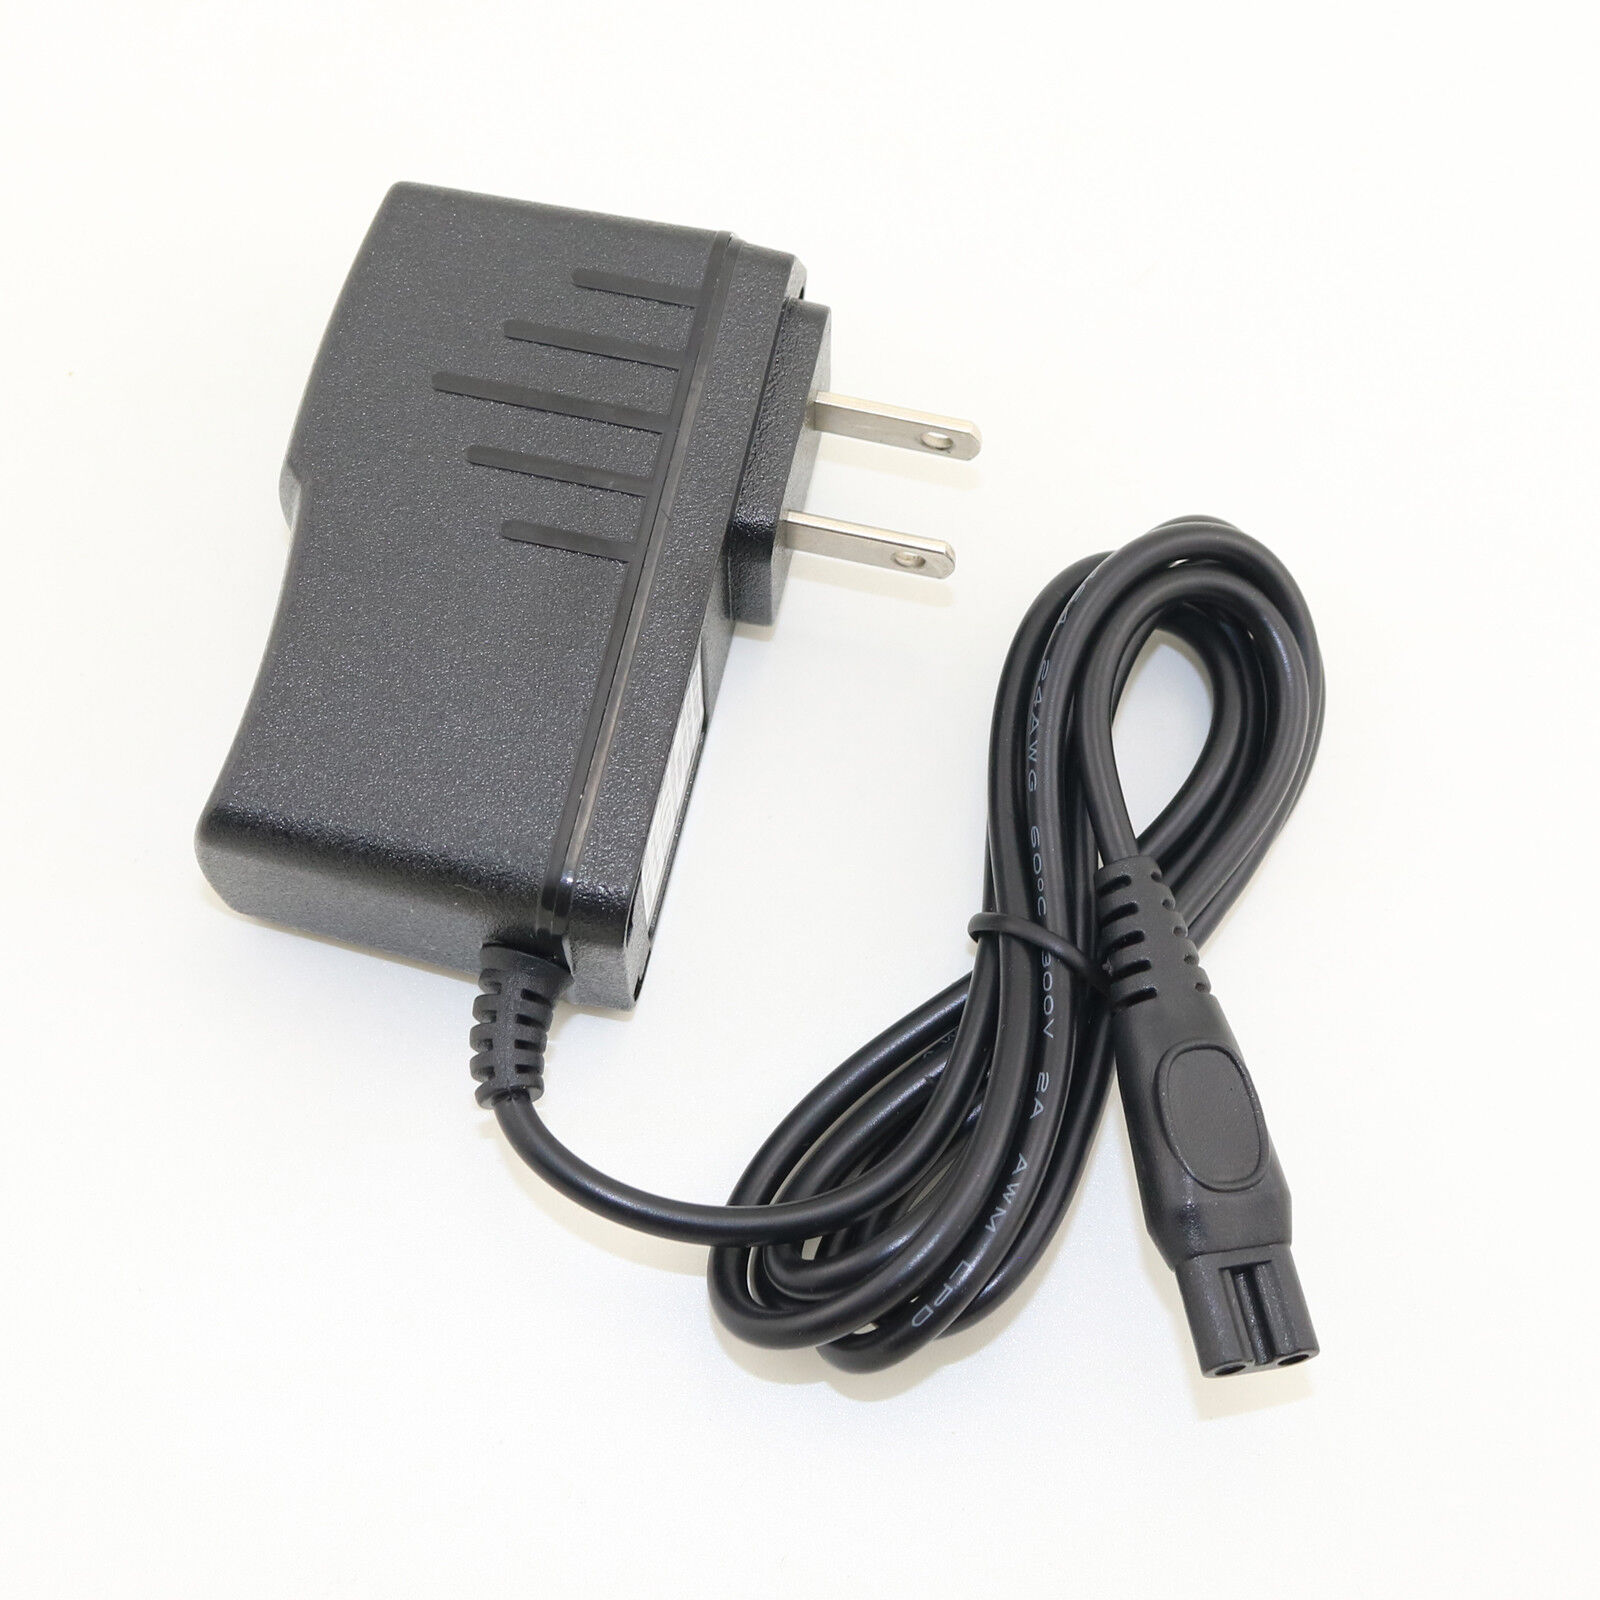 *Brand NEW*for Philips Norelco QT4000 Series Shaver QT4010 QT4014 AC Adapter Charger Cord